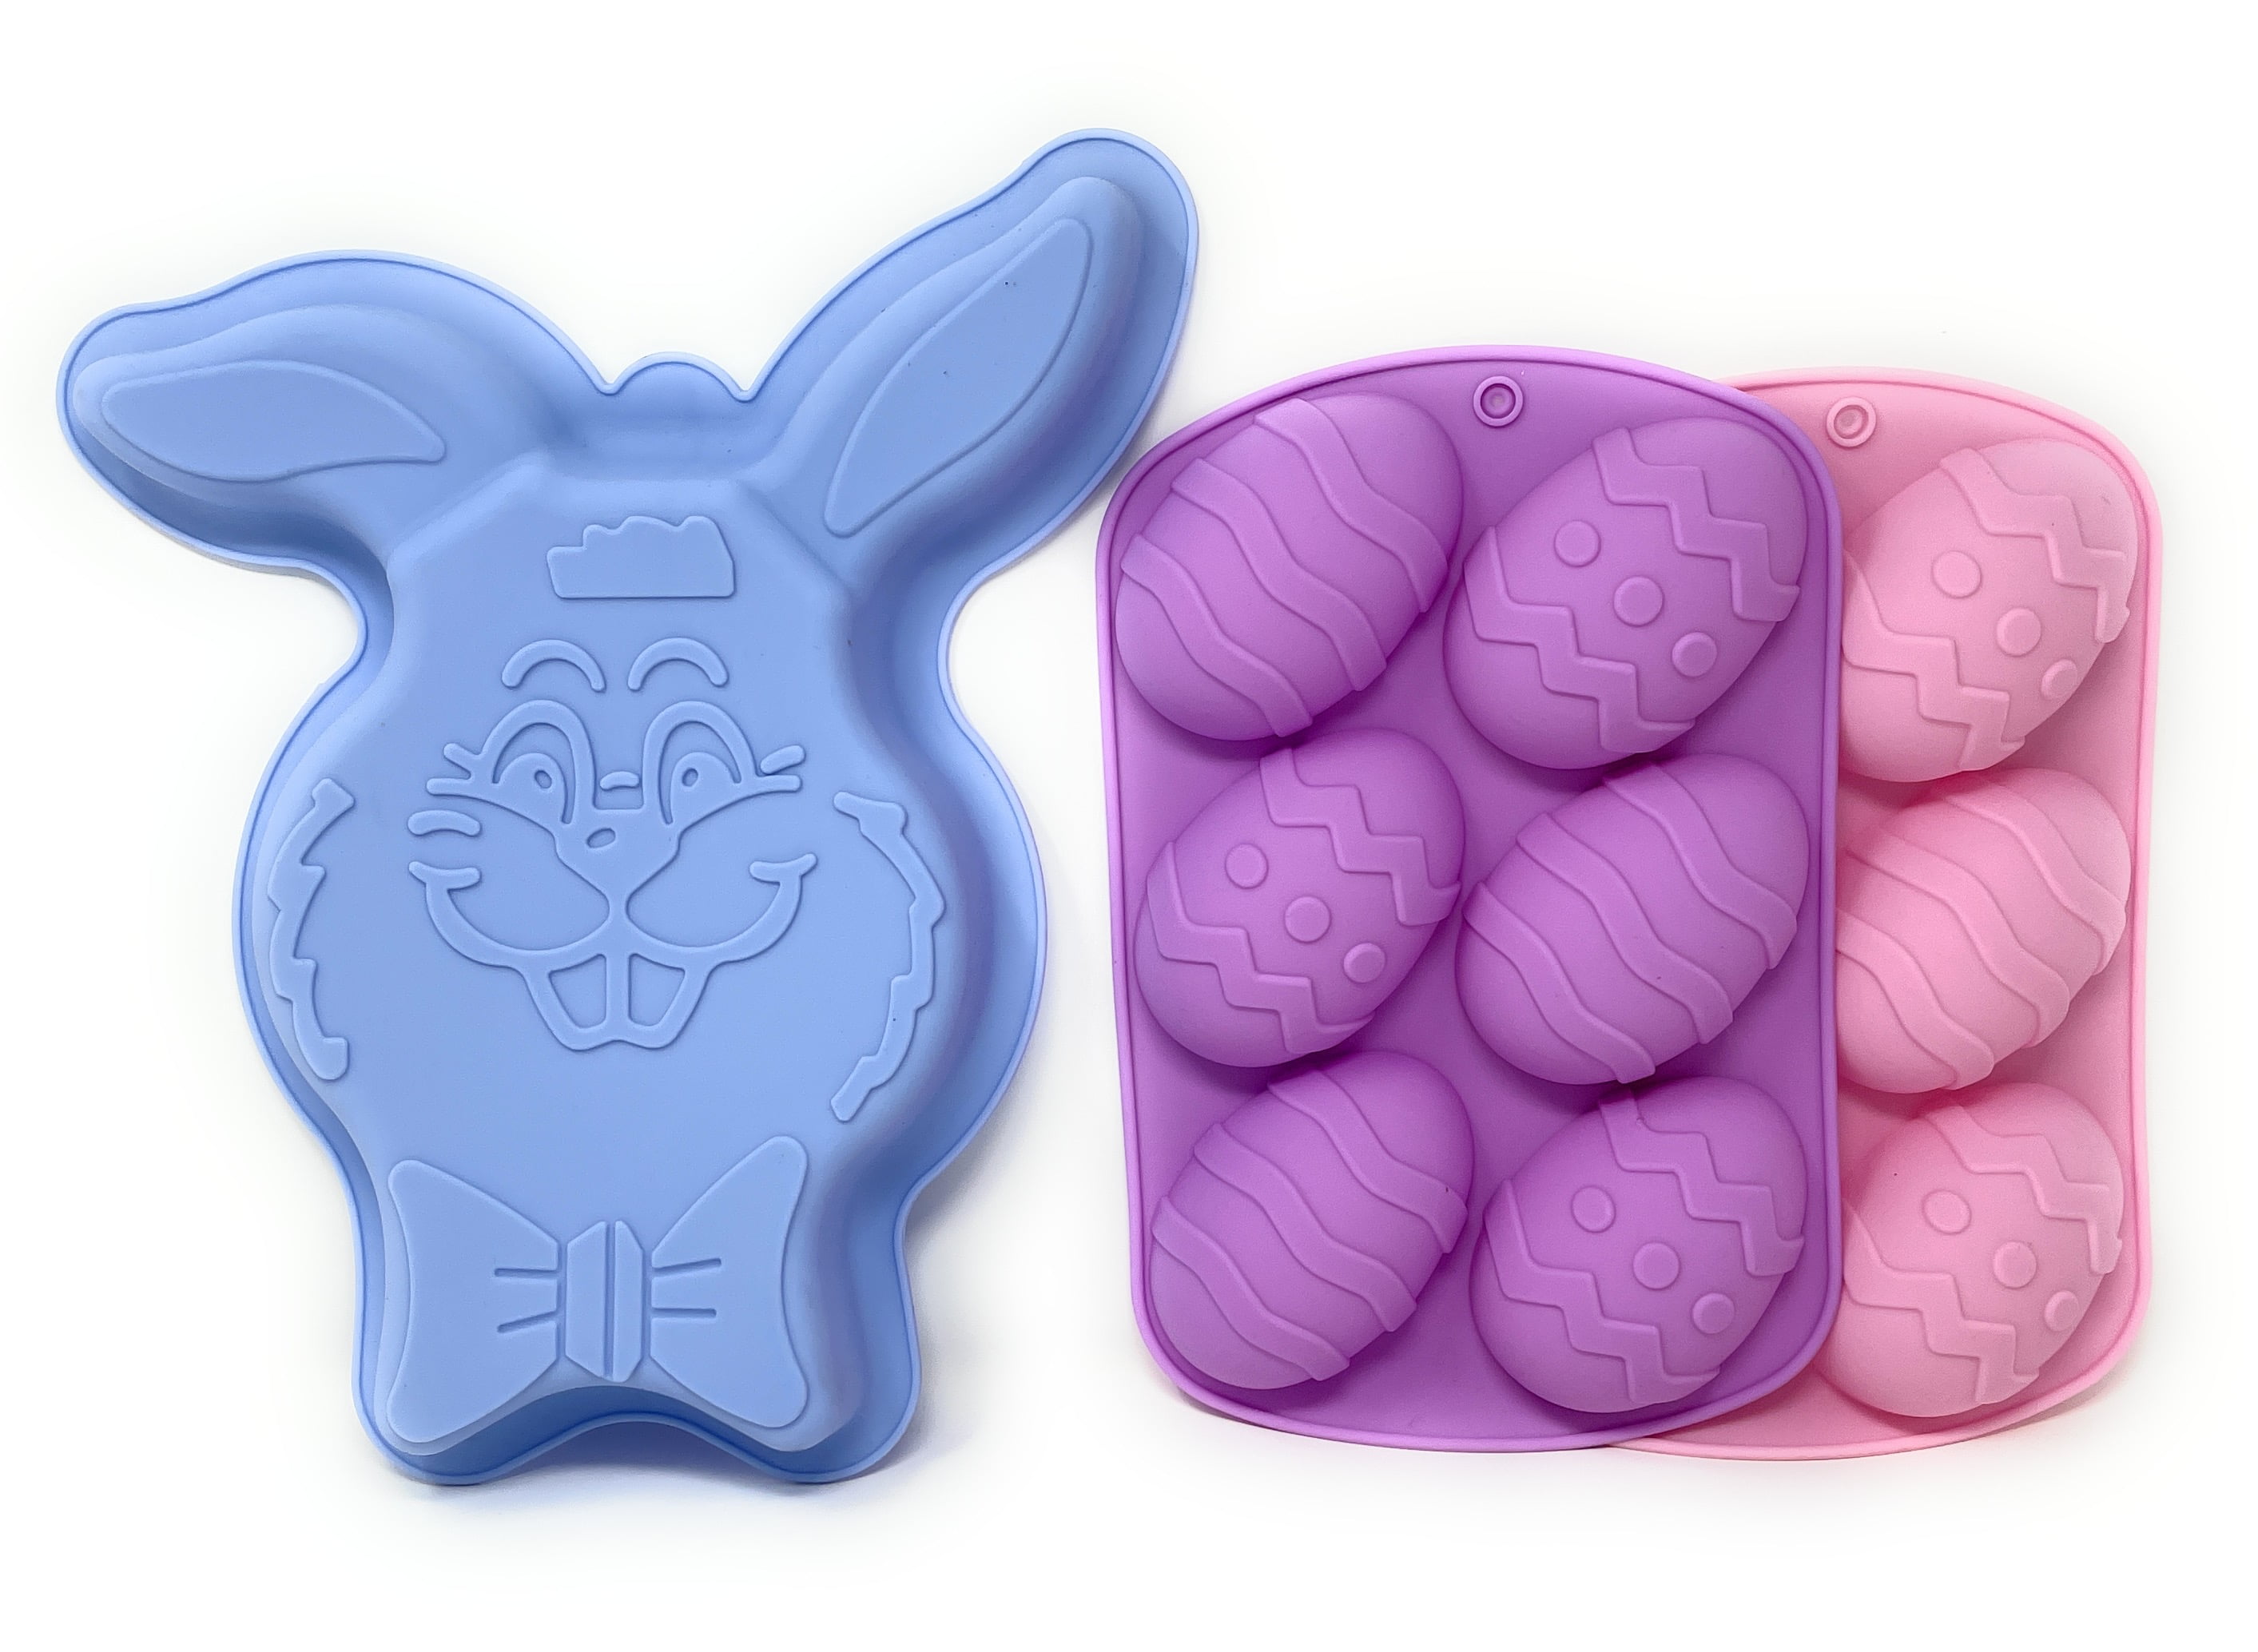 Kamehame Easter Egg Mold, Breakable Easter Egg Chocolate Mold, Large 3D  Silicone Easter Egg Candy Mold with 1 Hammer for Easter Decorations,  Dinosaur